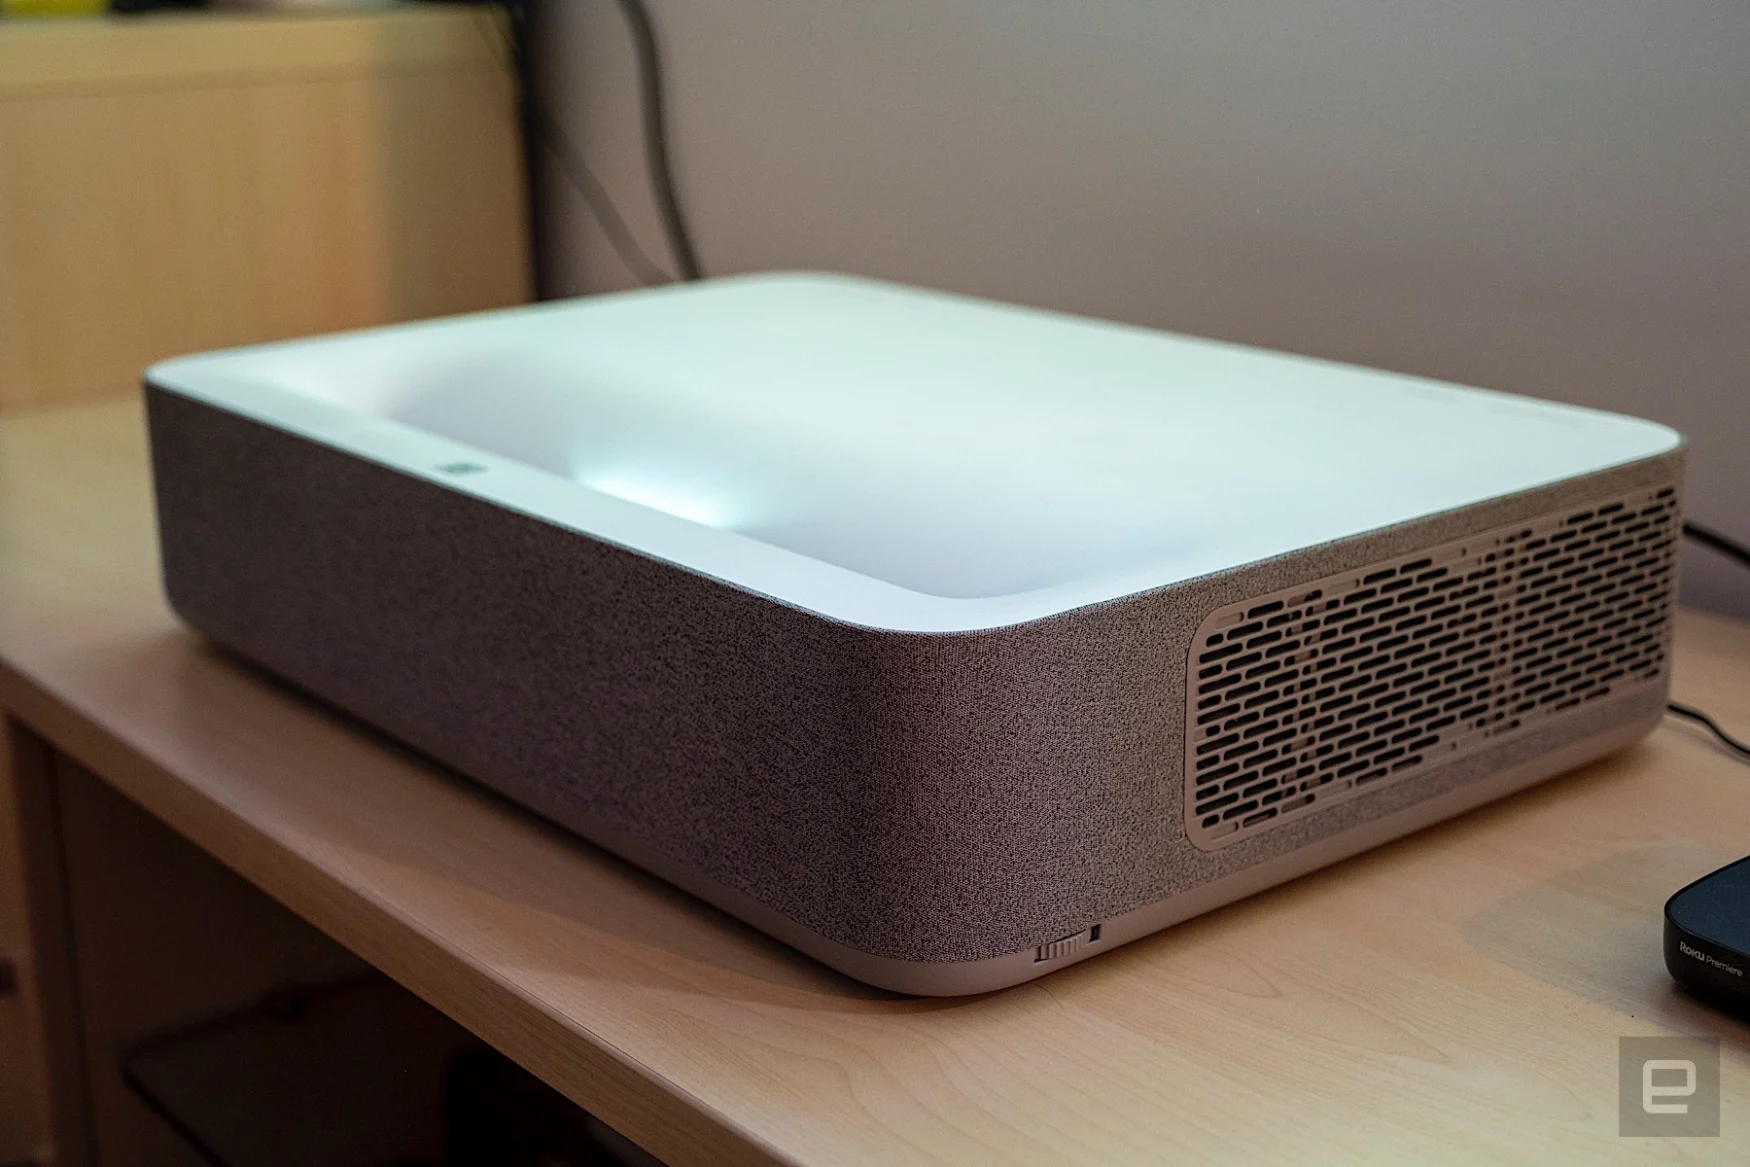 Vava 4K short-throw projector review.